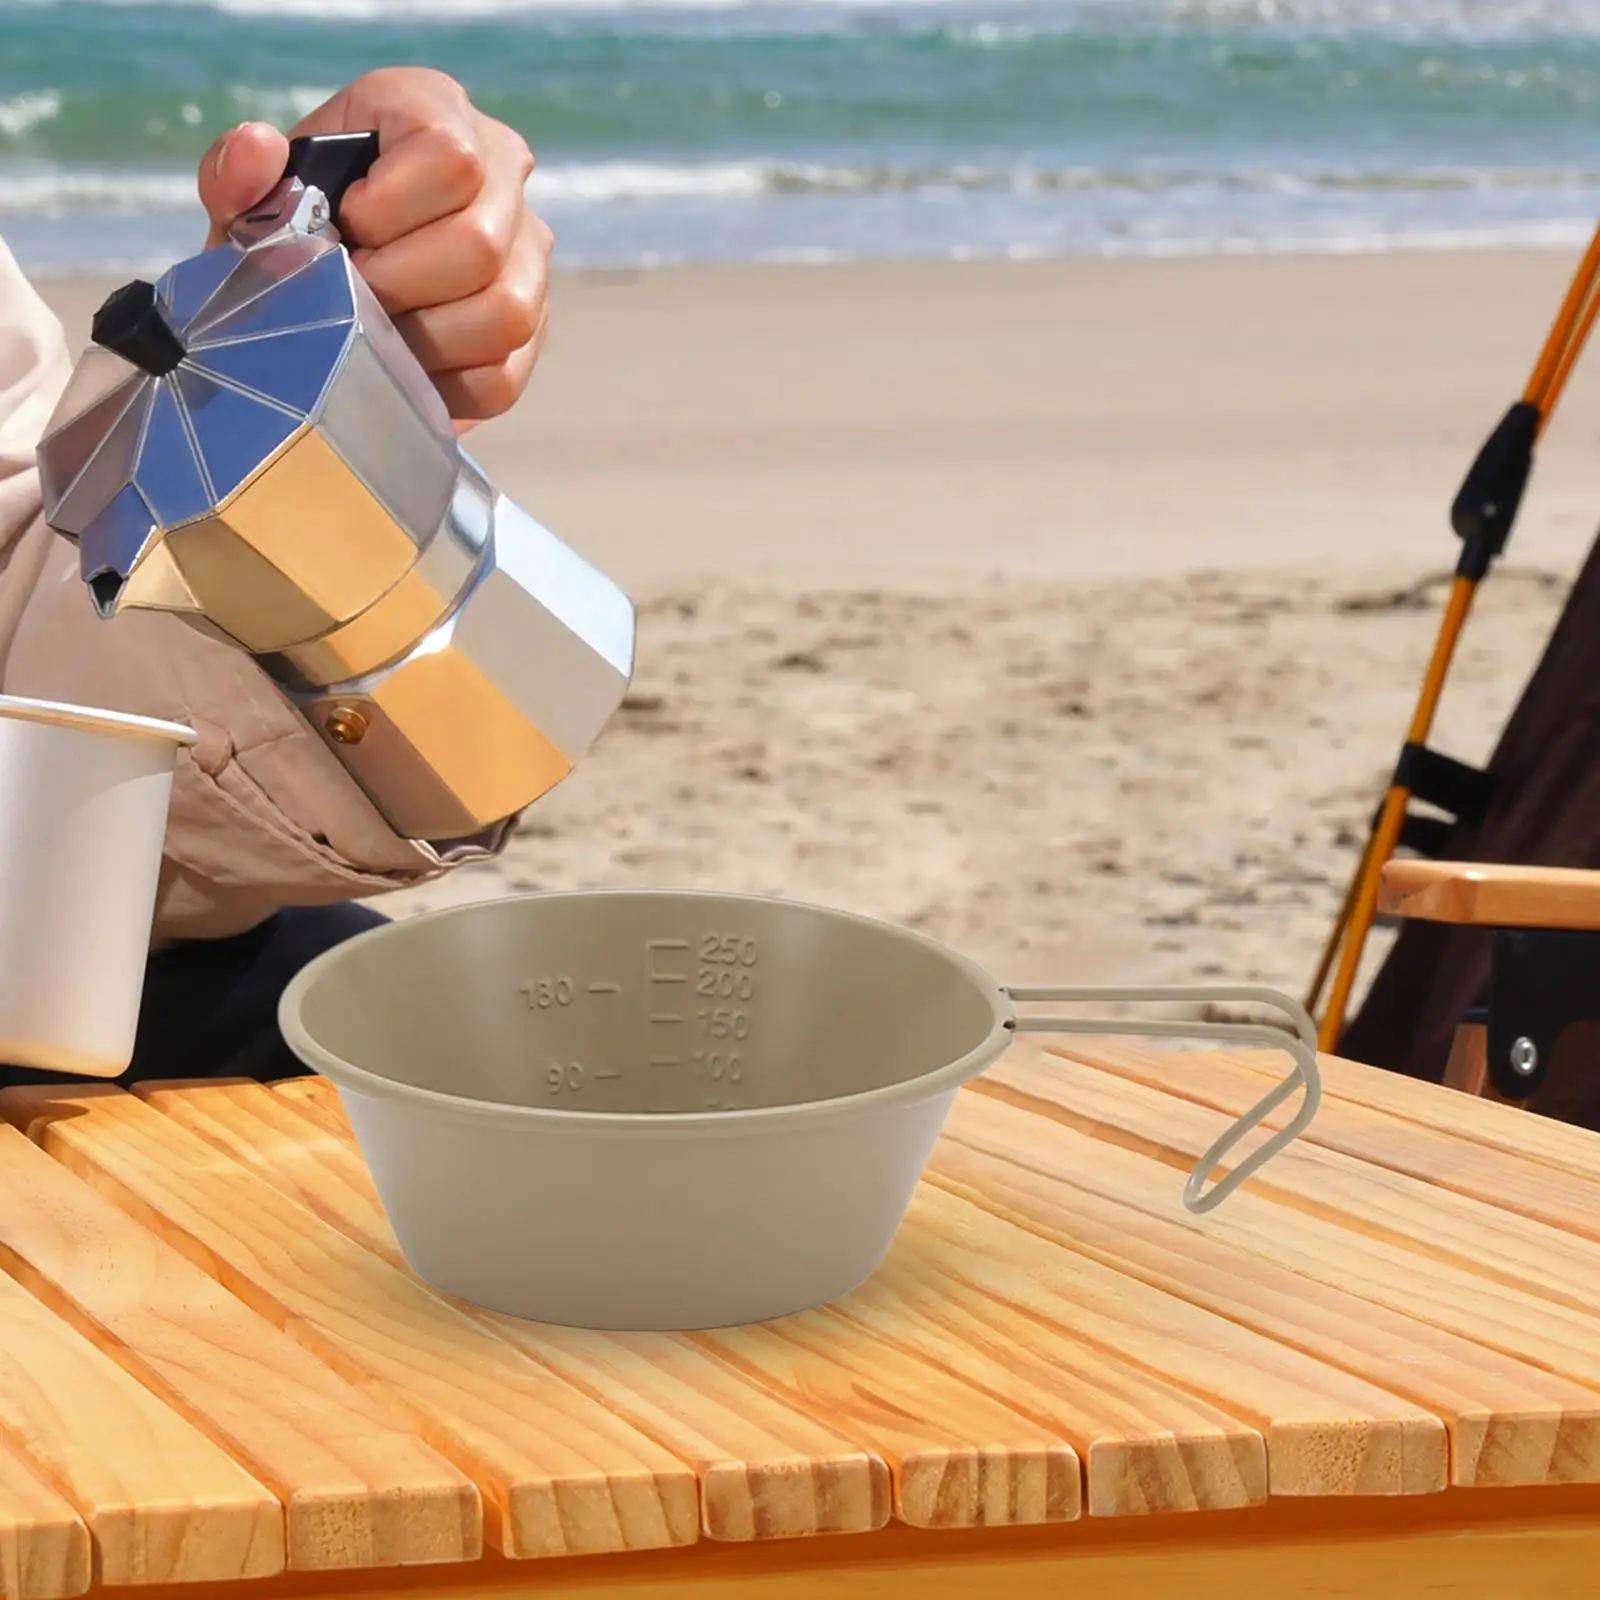 Camping Cups Utensils Mixing Cup Dinnerware Outdoor Cookware Stainless Steel Bowl Pan for Picnic Adventure Travel Cereal Cooking